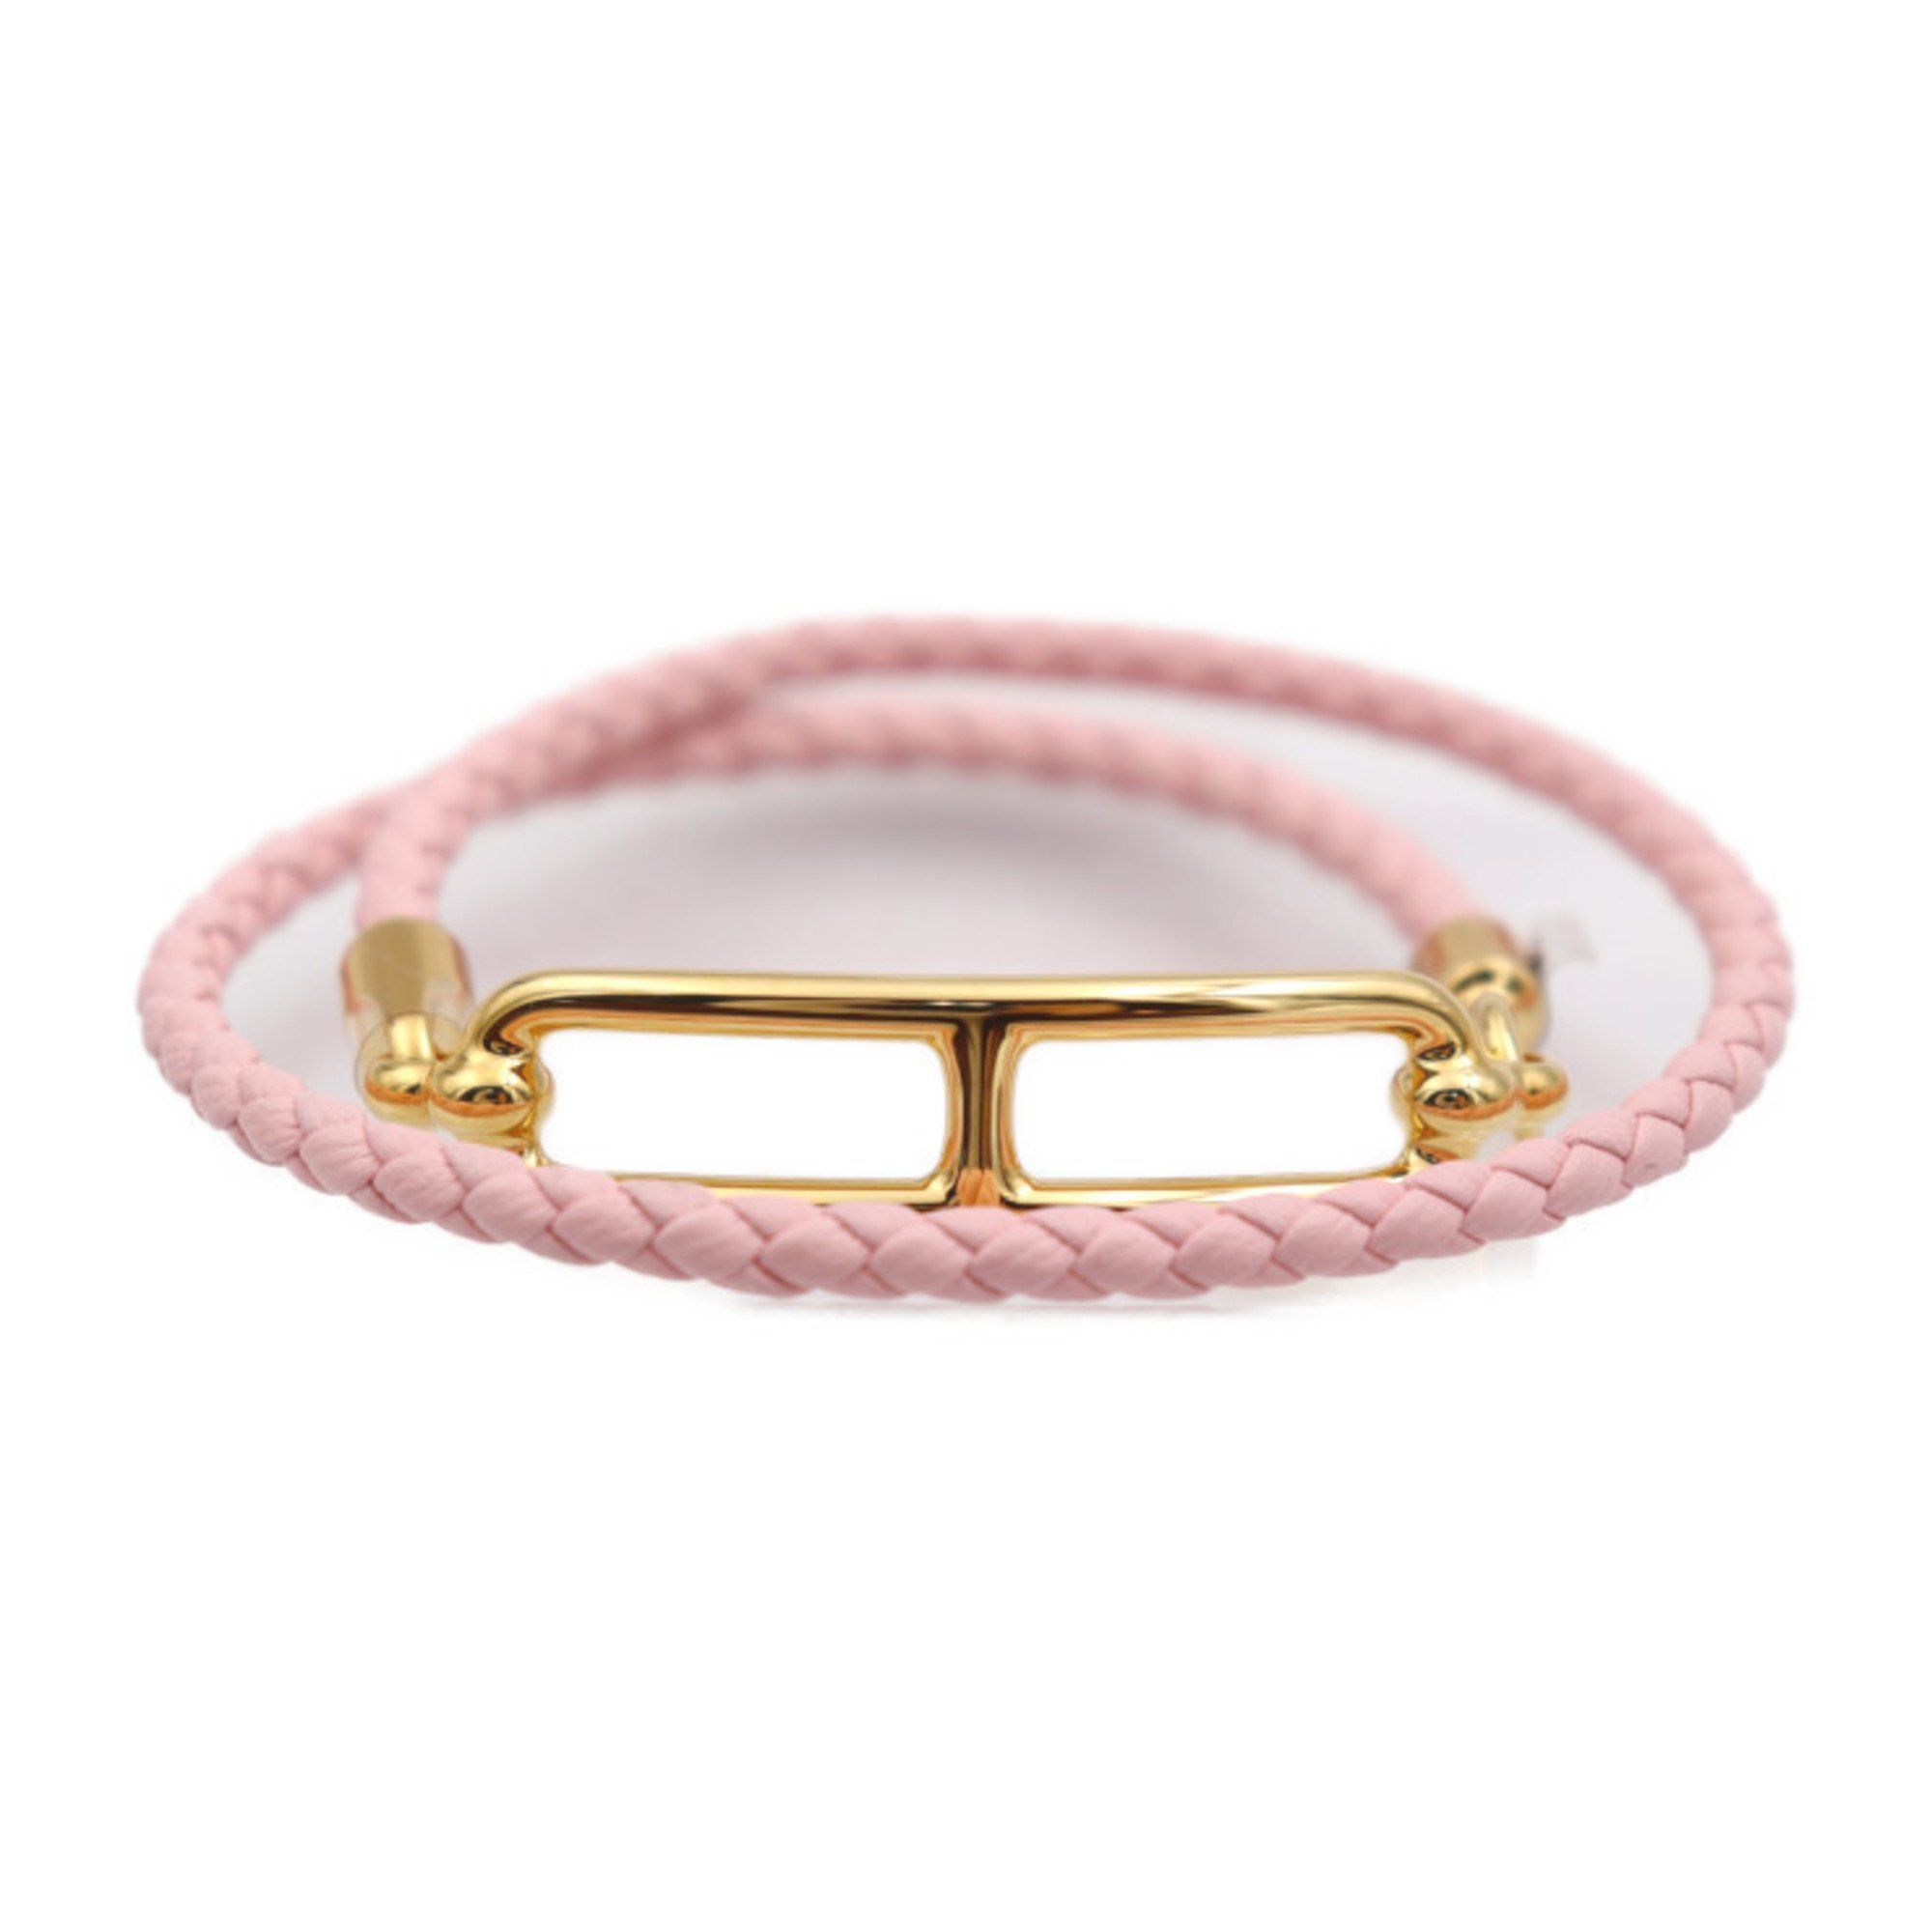 image of Hermes Luli Bracelet Size T2 Leather Metal Pink Gold Chaine D'ancle Double Tour Braided, Women's